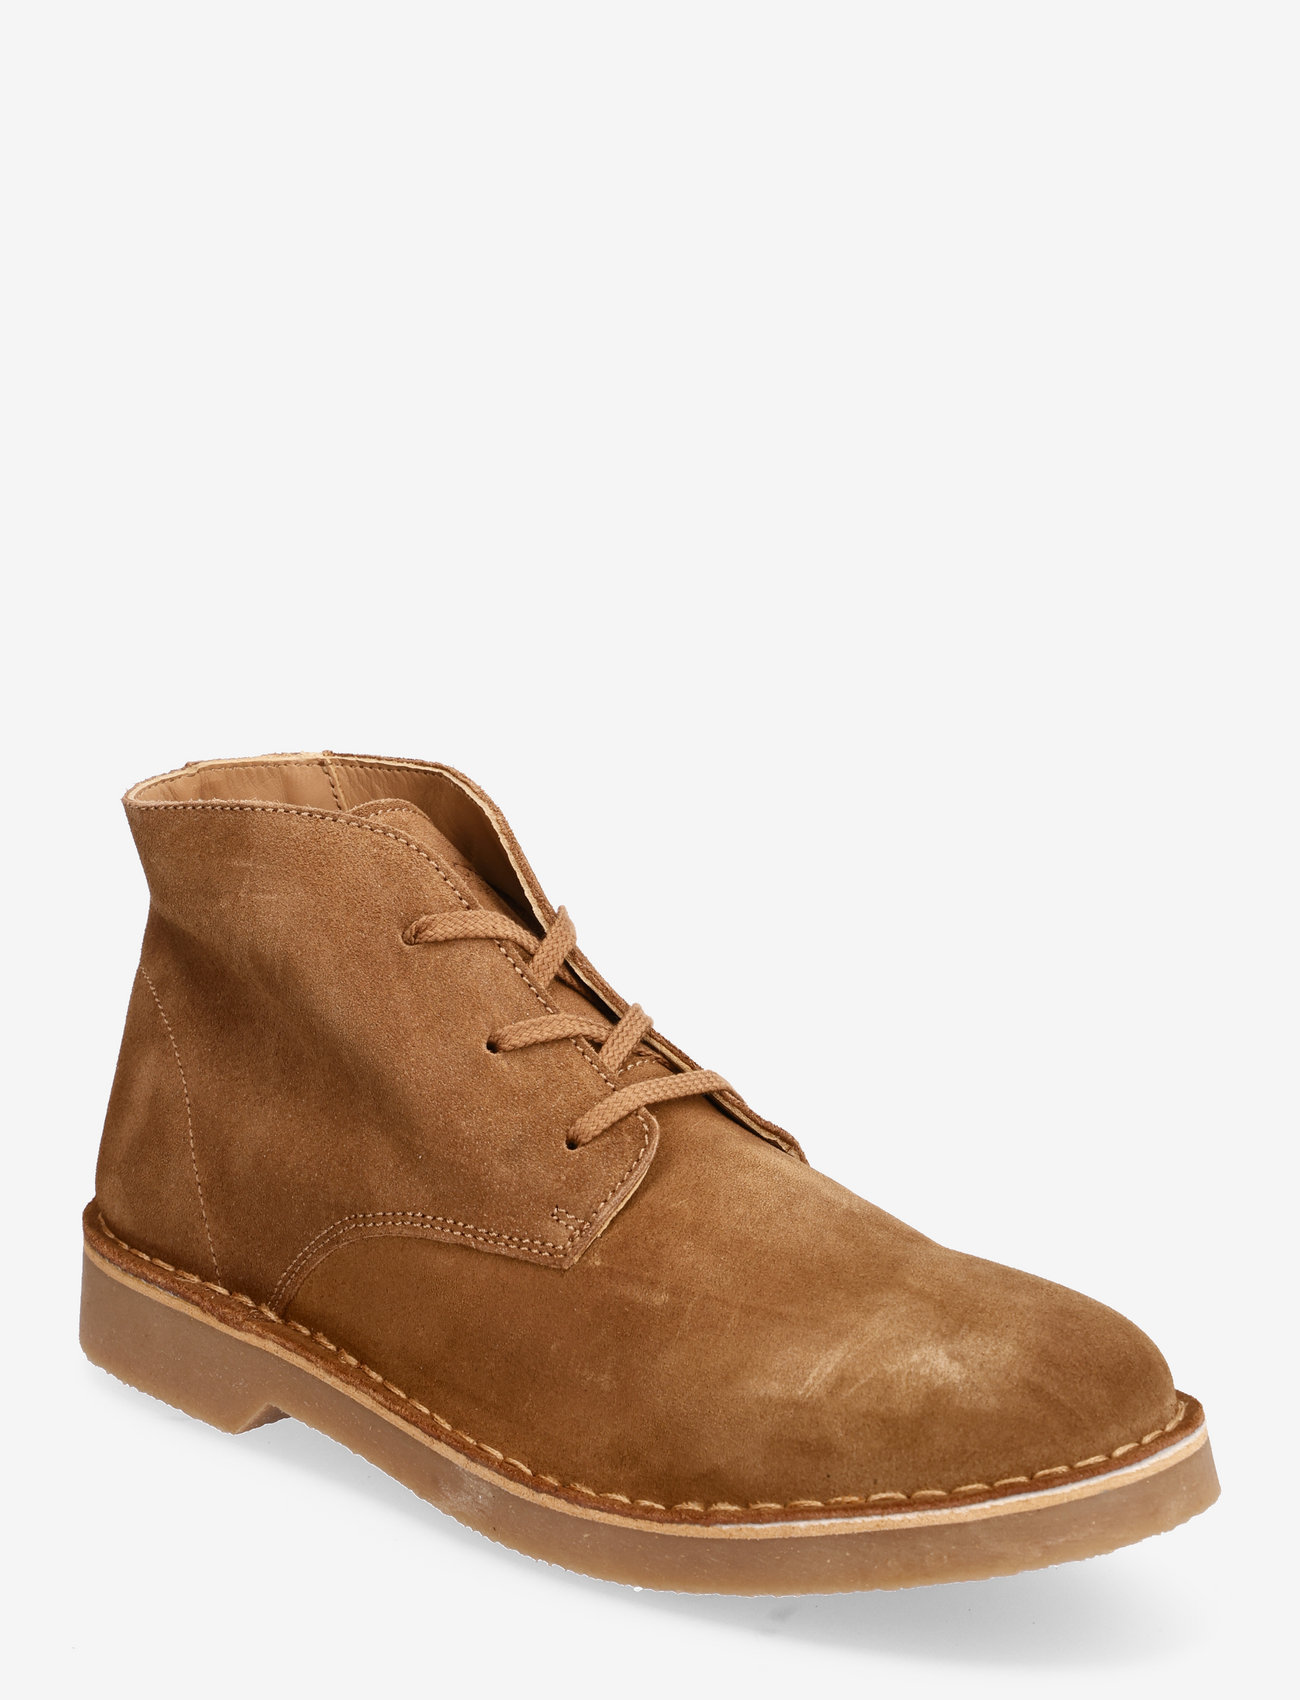 Selected Homme - SLHRIGA NEW SUEDE CHUKKA BOOT B - aavikkokengät - tobacco brown - 0